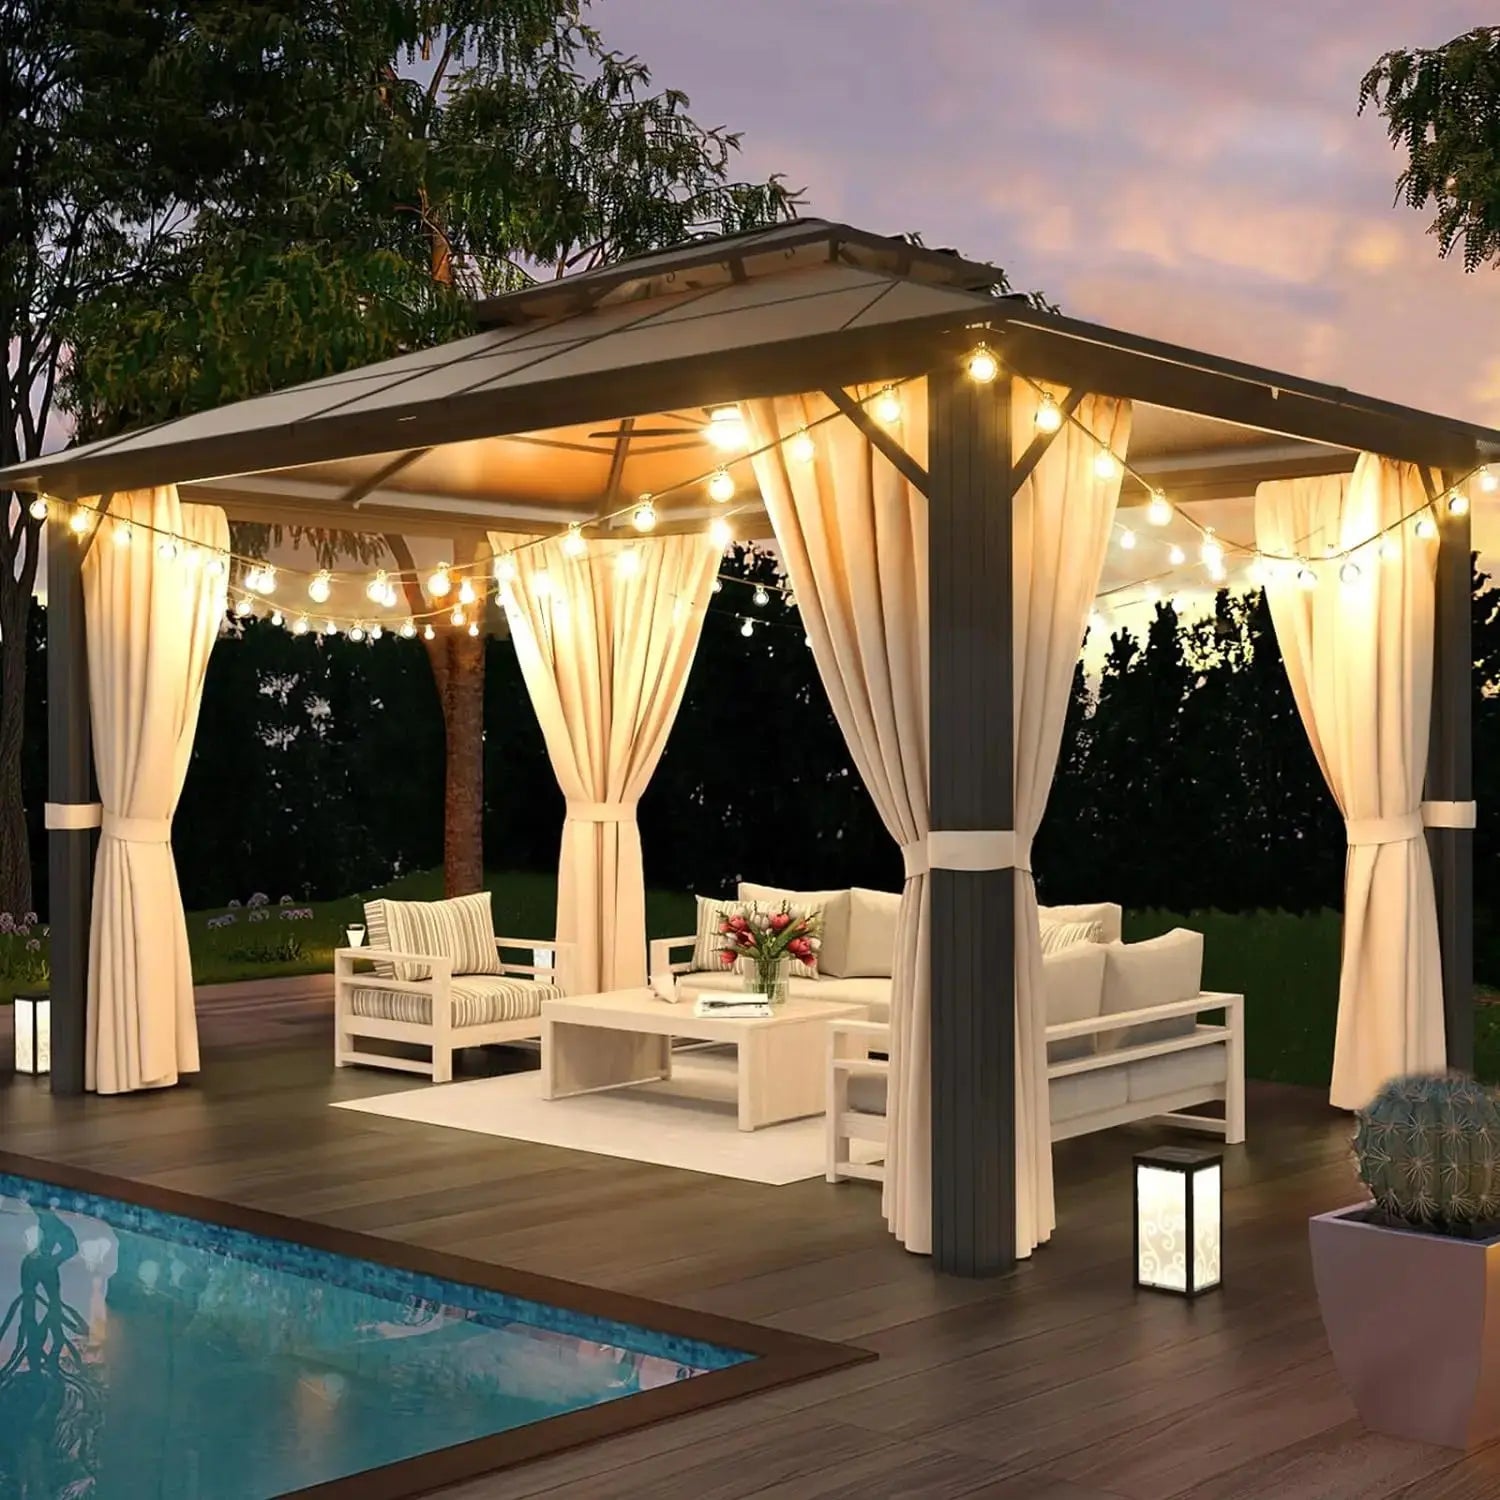 Double Roof Gazebo, Aluminum Frame Permanent Pavilion with Netting and Curtains, Outdoor Gazebo, for Patios, Gardens, Lawns - The Greenhouse Pros